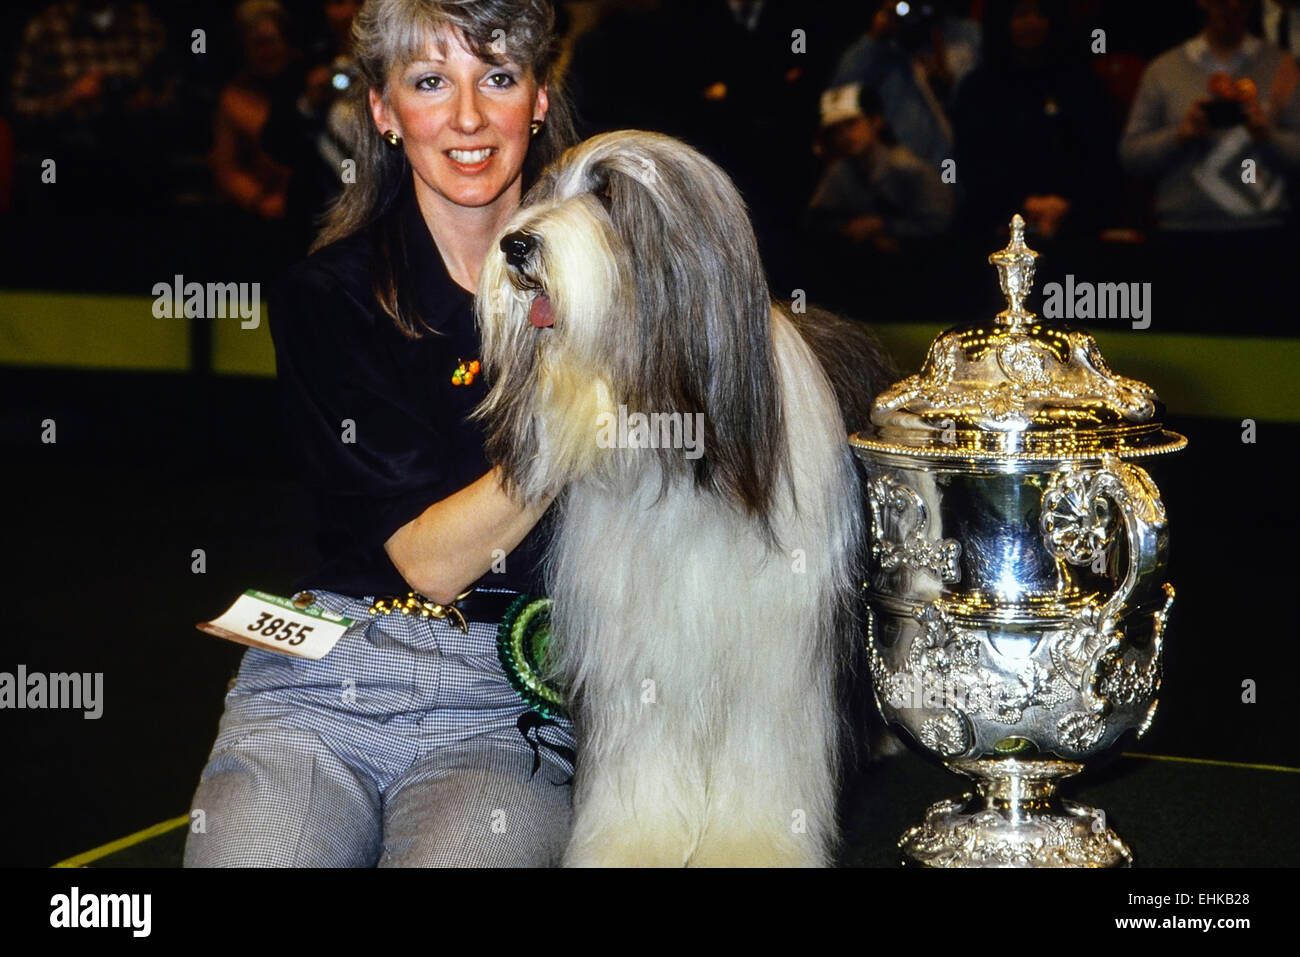 Crufts 1989 Best in show winner. Potterdale Classic of Moonhill. Bearded Collie. Owned by Brenda White. Earls Court. London Stock Photo